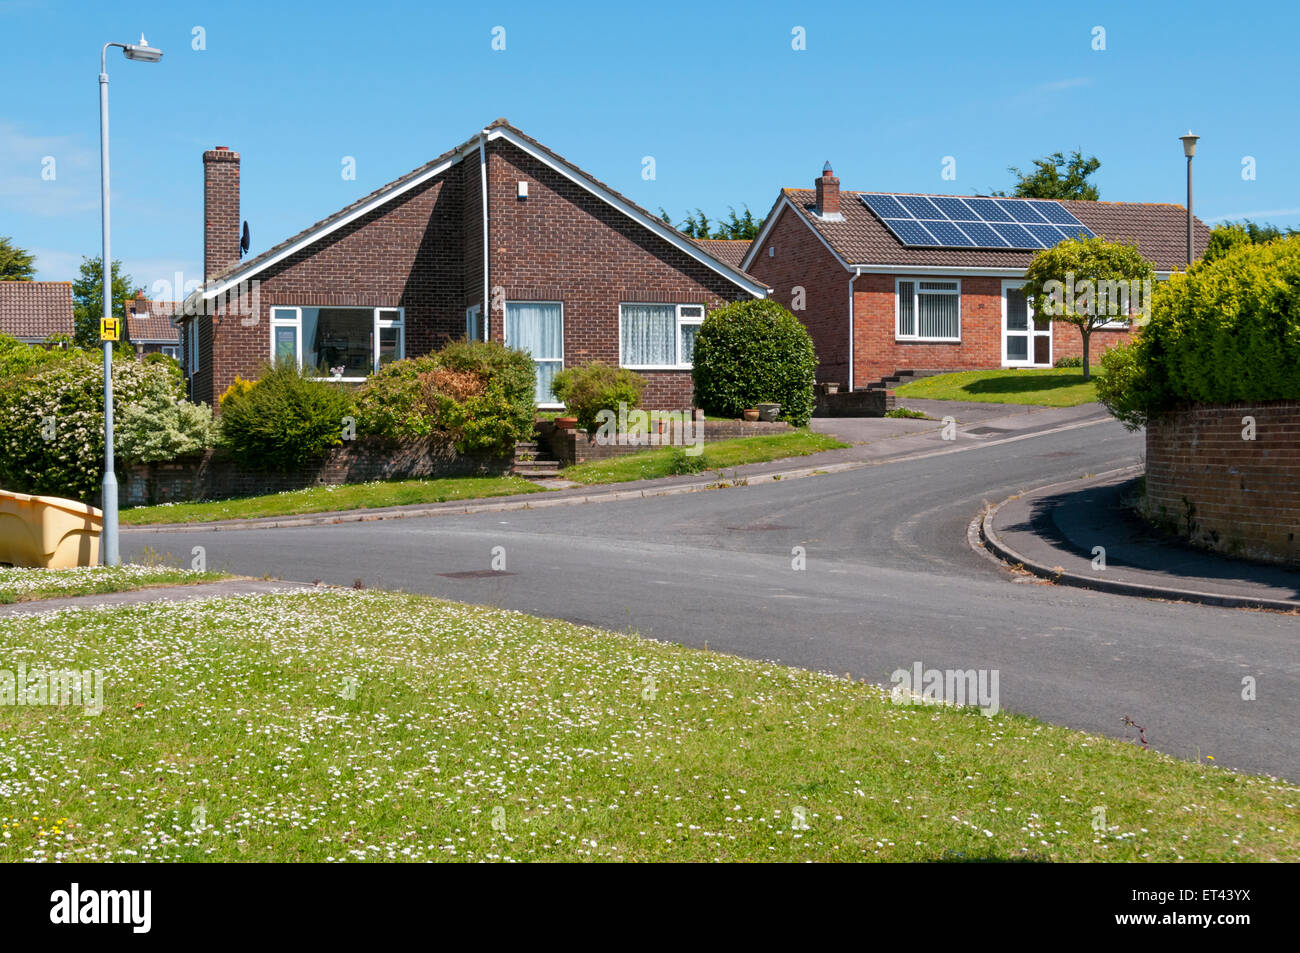 An estate of bungalows in Westbury, Wiltshire. Stock Photo